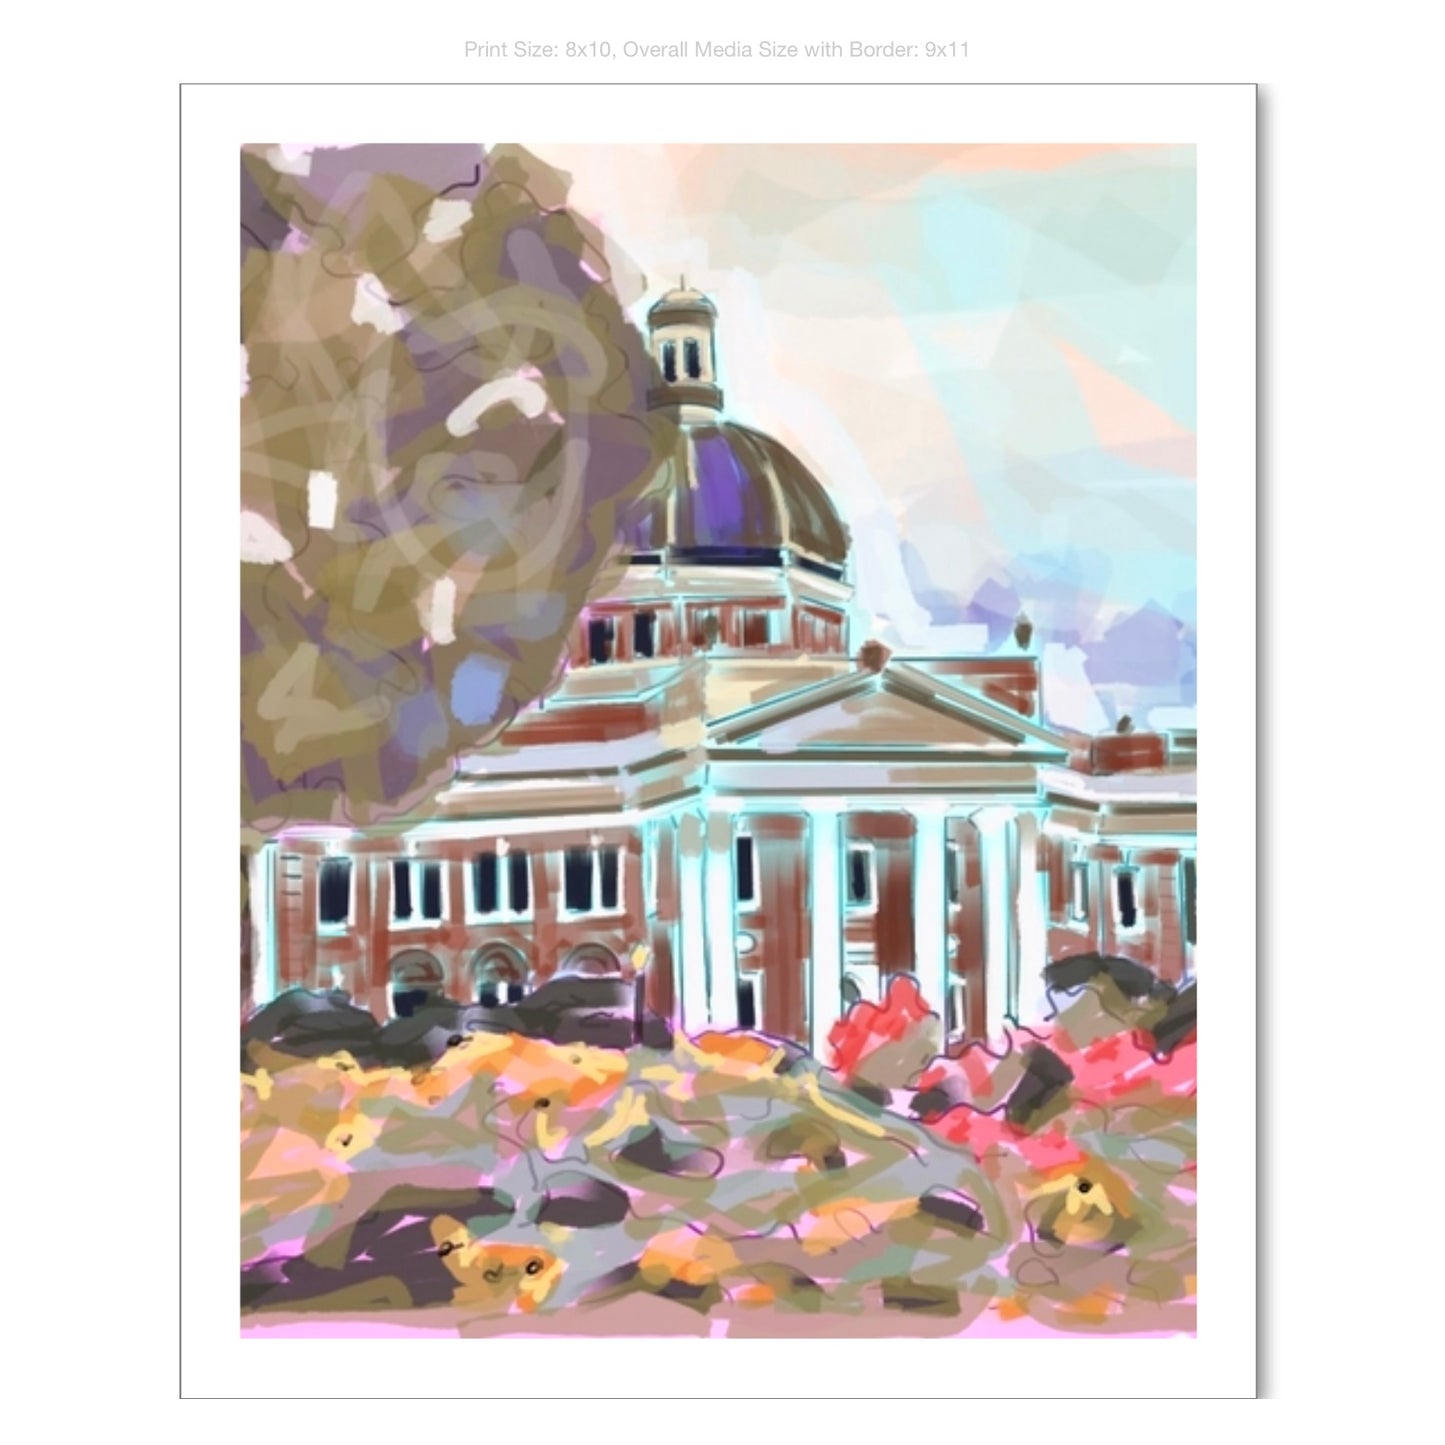 Southern Miss Campus Giclee on Premium Heavyweight Paper